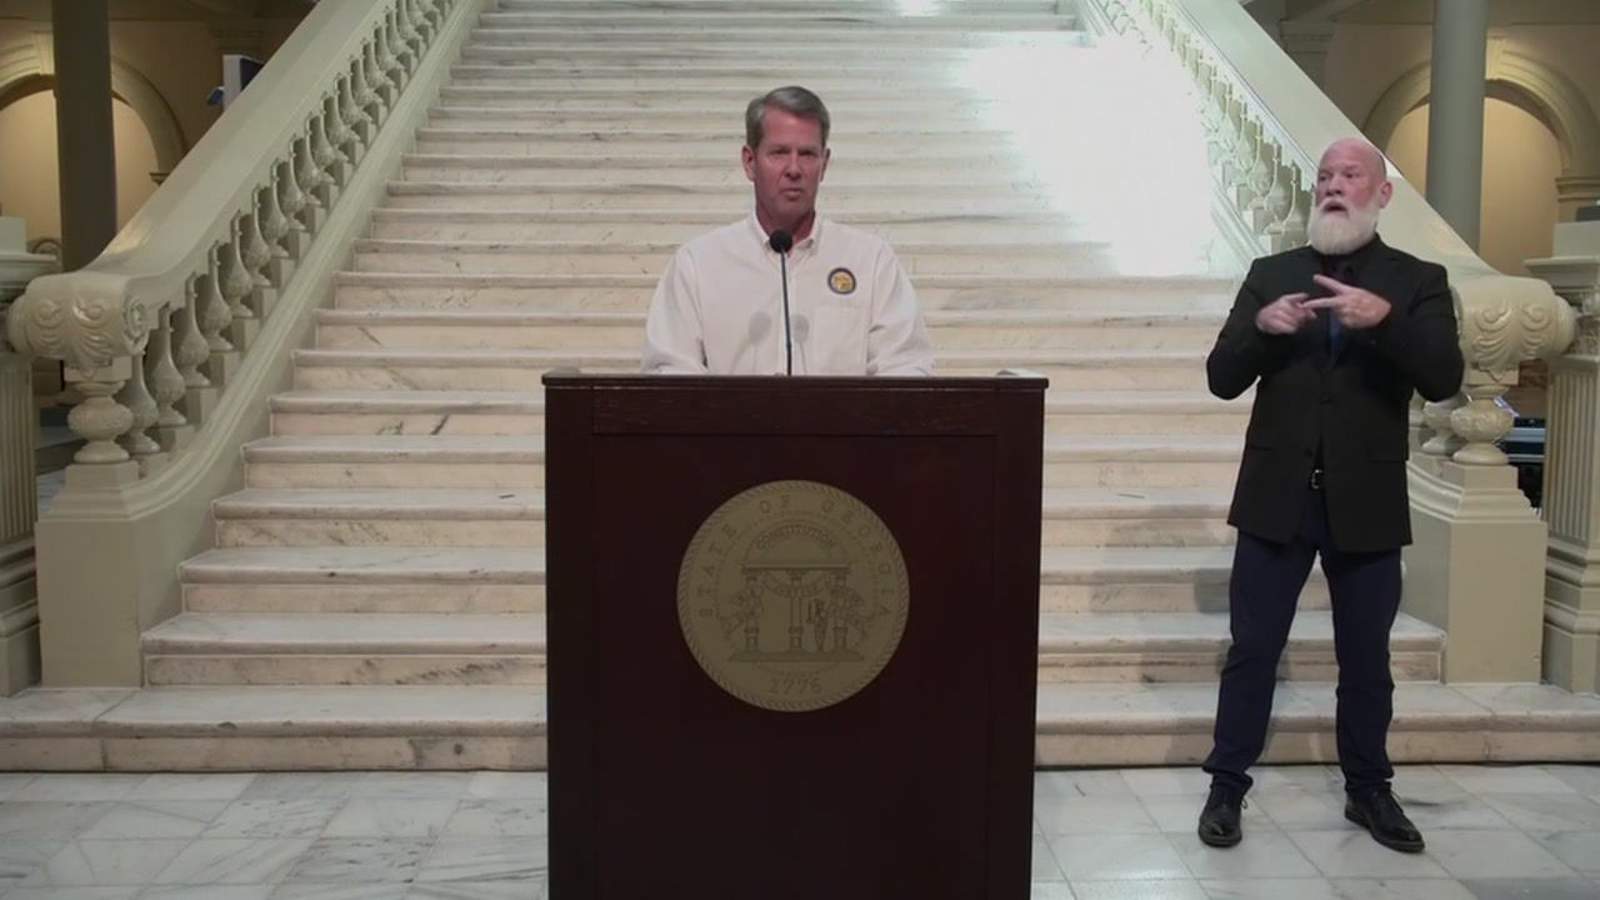 WATCH LIVE: Georgia Governor Kemp to give update on COVID-19